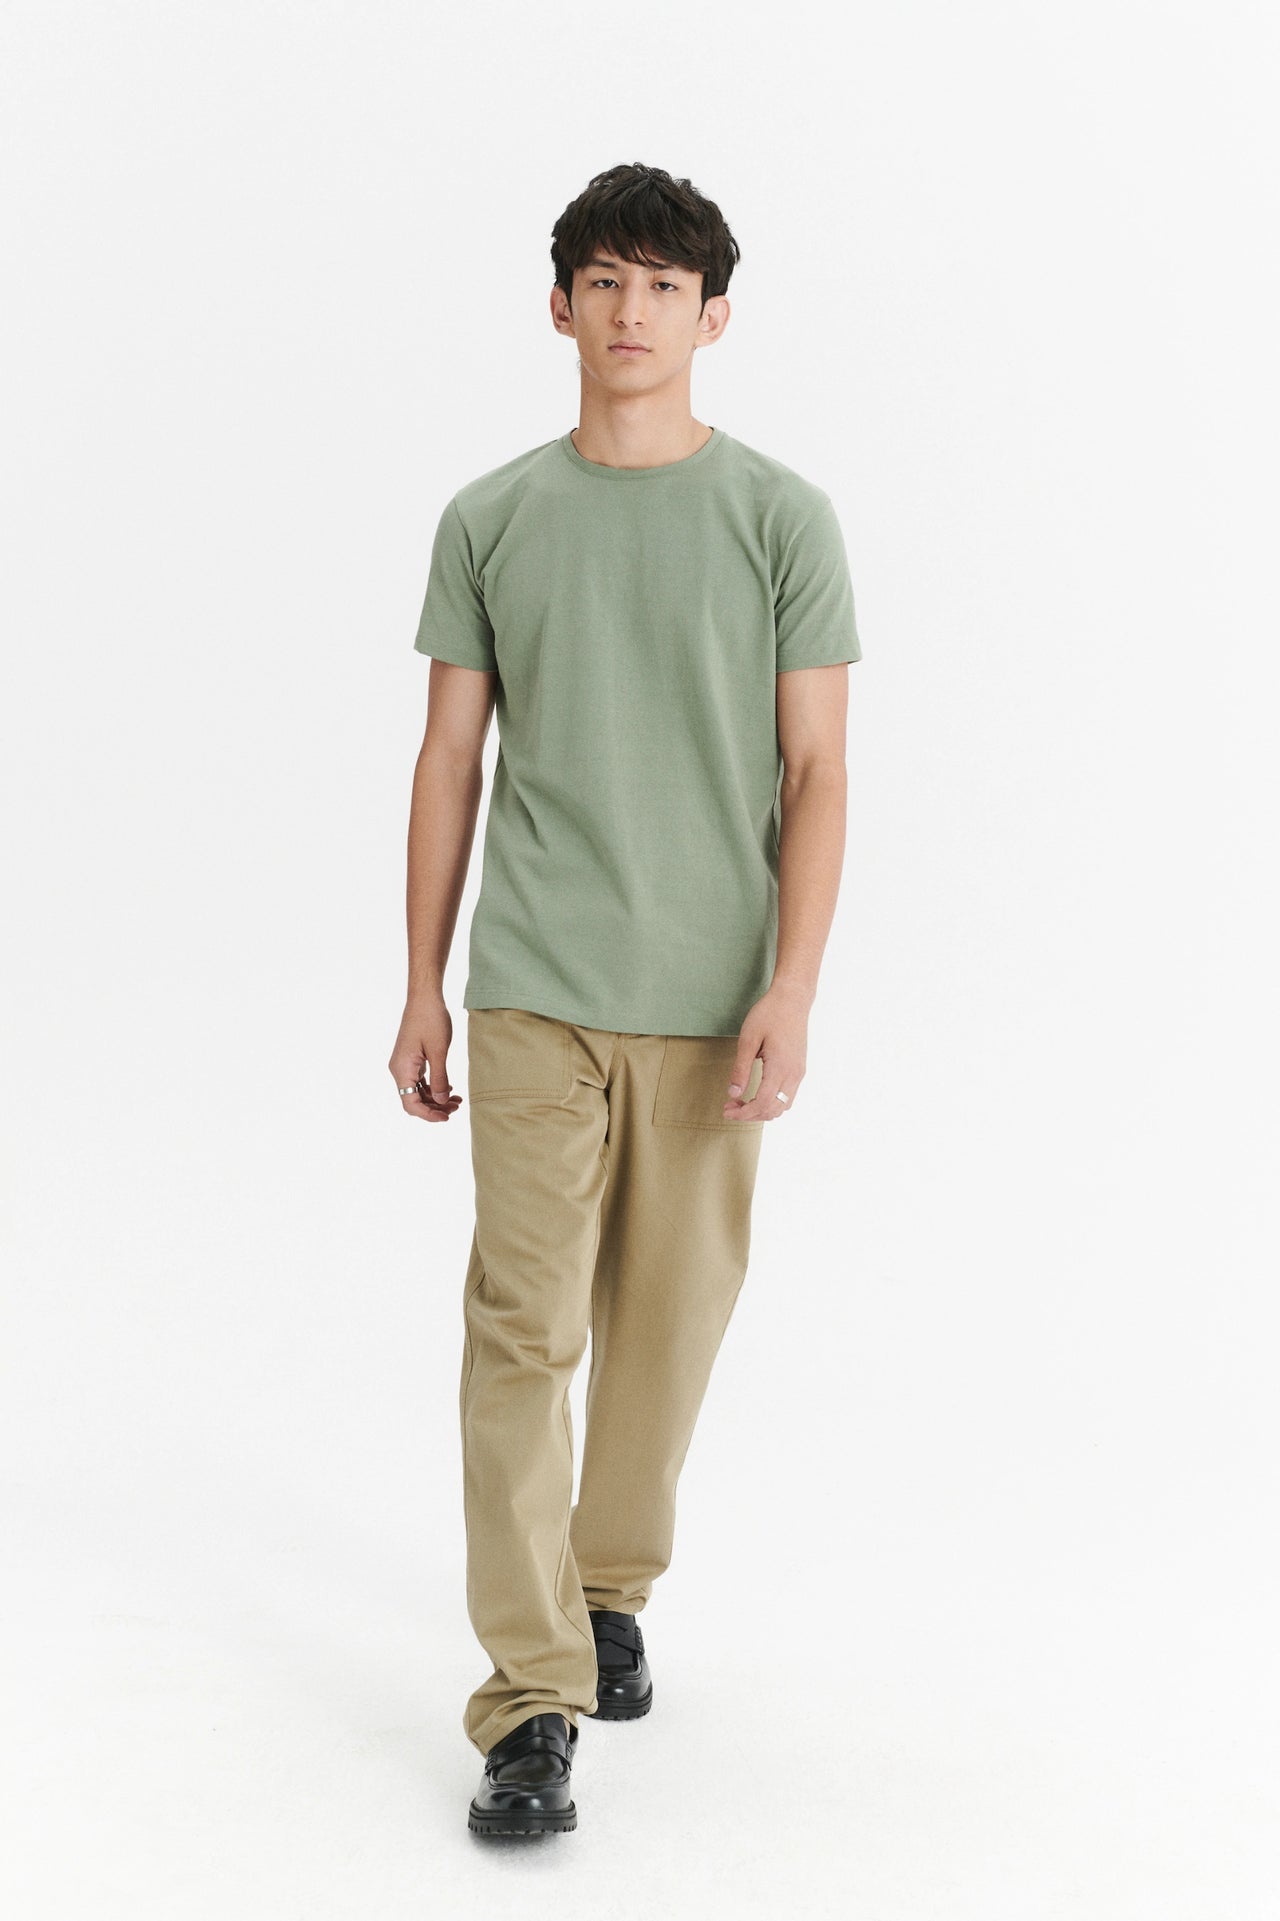 Relaxed T-Shirt in a Green Sage Japanese Sturdy Cotton Jersey